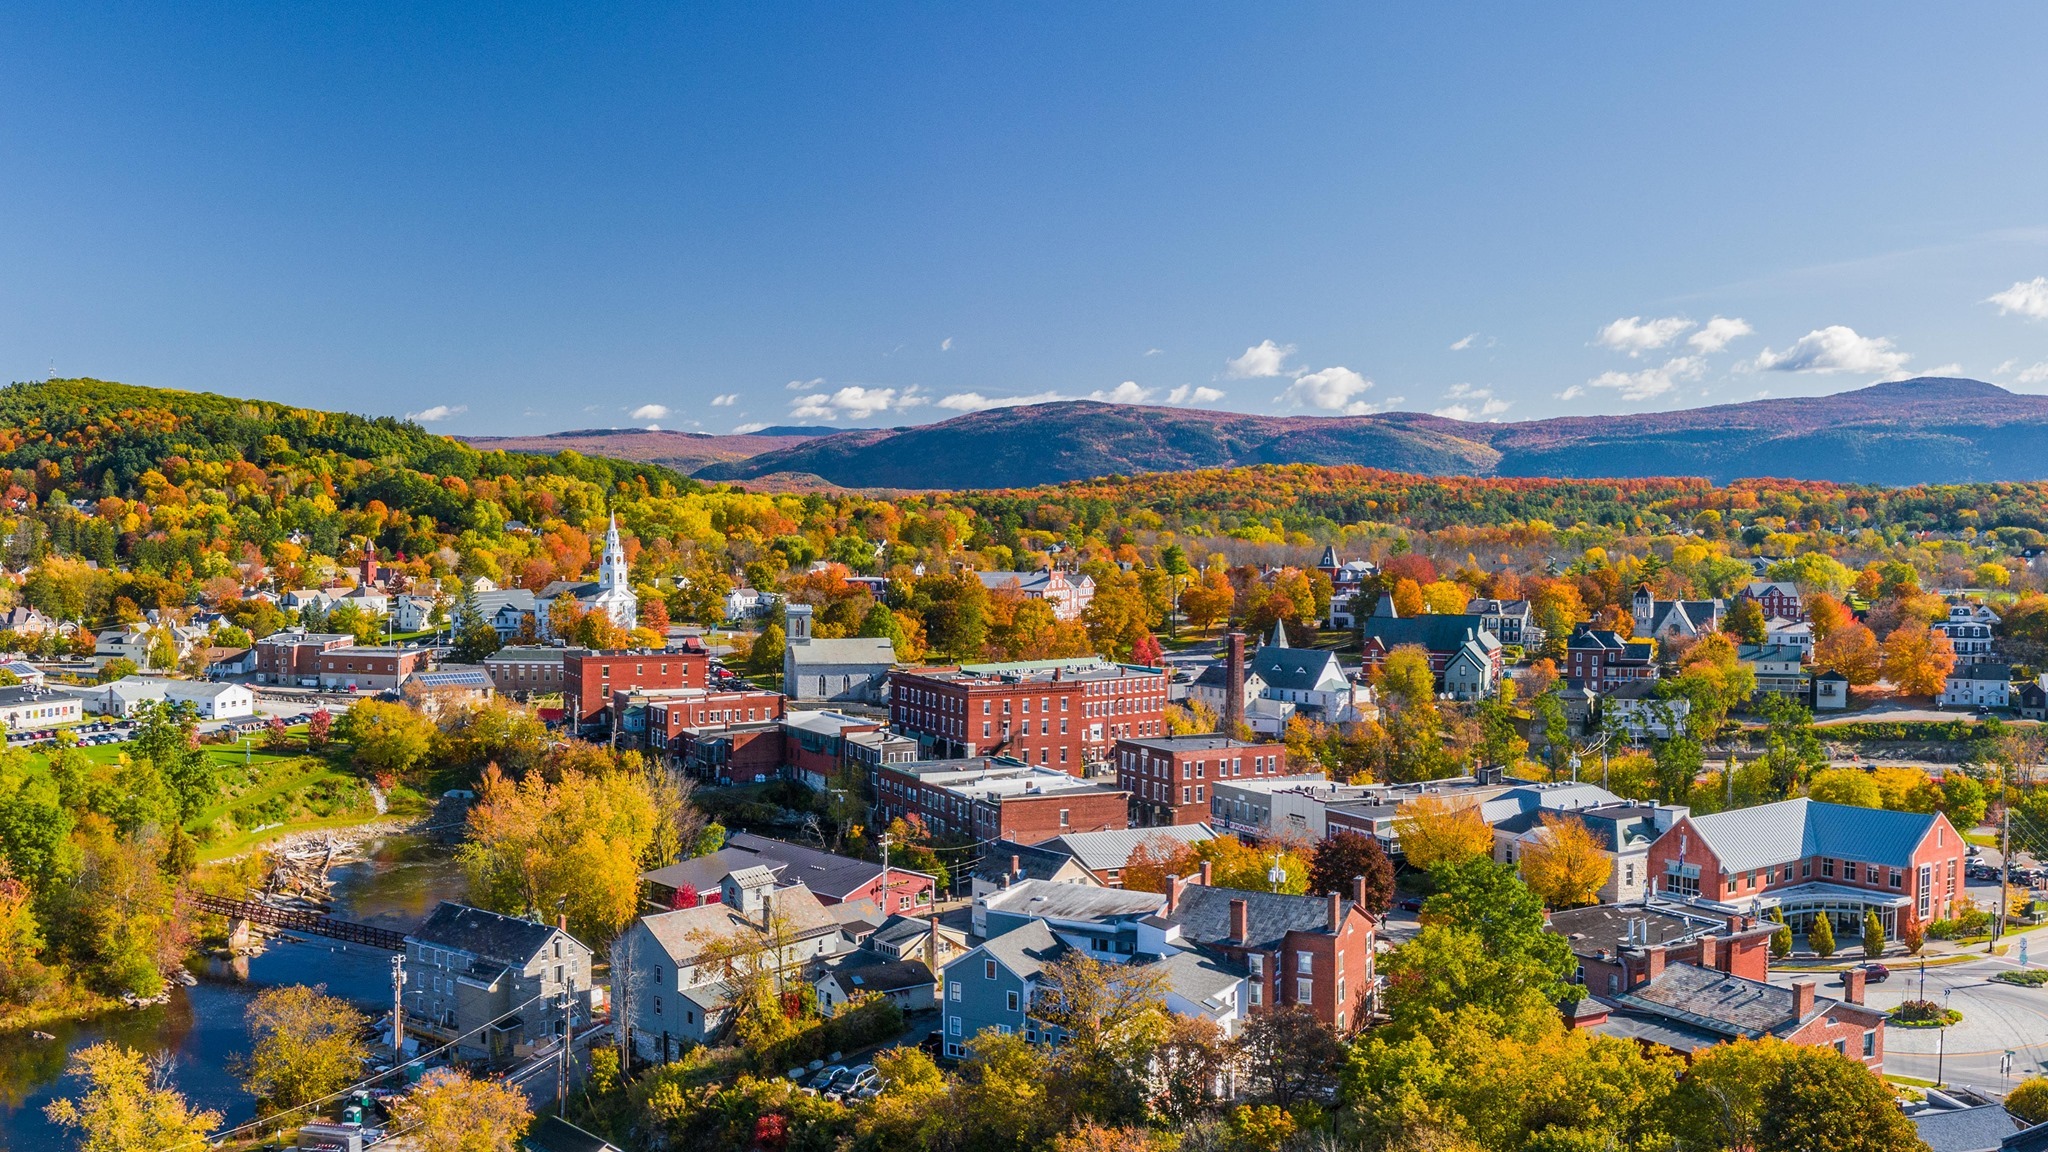 <p>Nestled among the pastoral beauty of Vermont’s Champlain Valley, <a href="http://www.middlebury.edu/about" rel="noreferrer noopener">Middlebury College</a> has vast expanses of green space and lovely historic buildings such as the Old Chapel (pictured).</p><p><a href="https://www.facebook.com/middleburycollege/photos/a.10150747883262629/10157566710807629" rel="noreferrer noopener">See photo on Facebook</a></p>